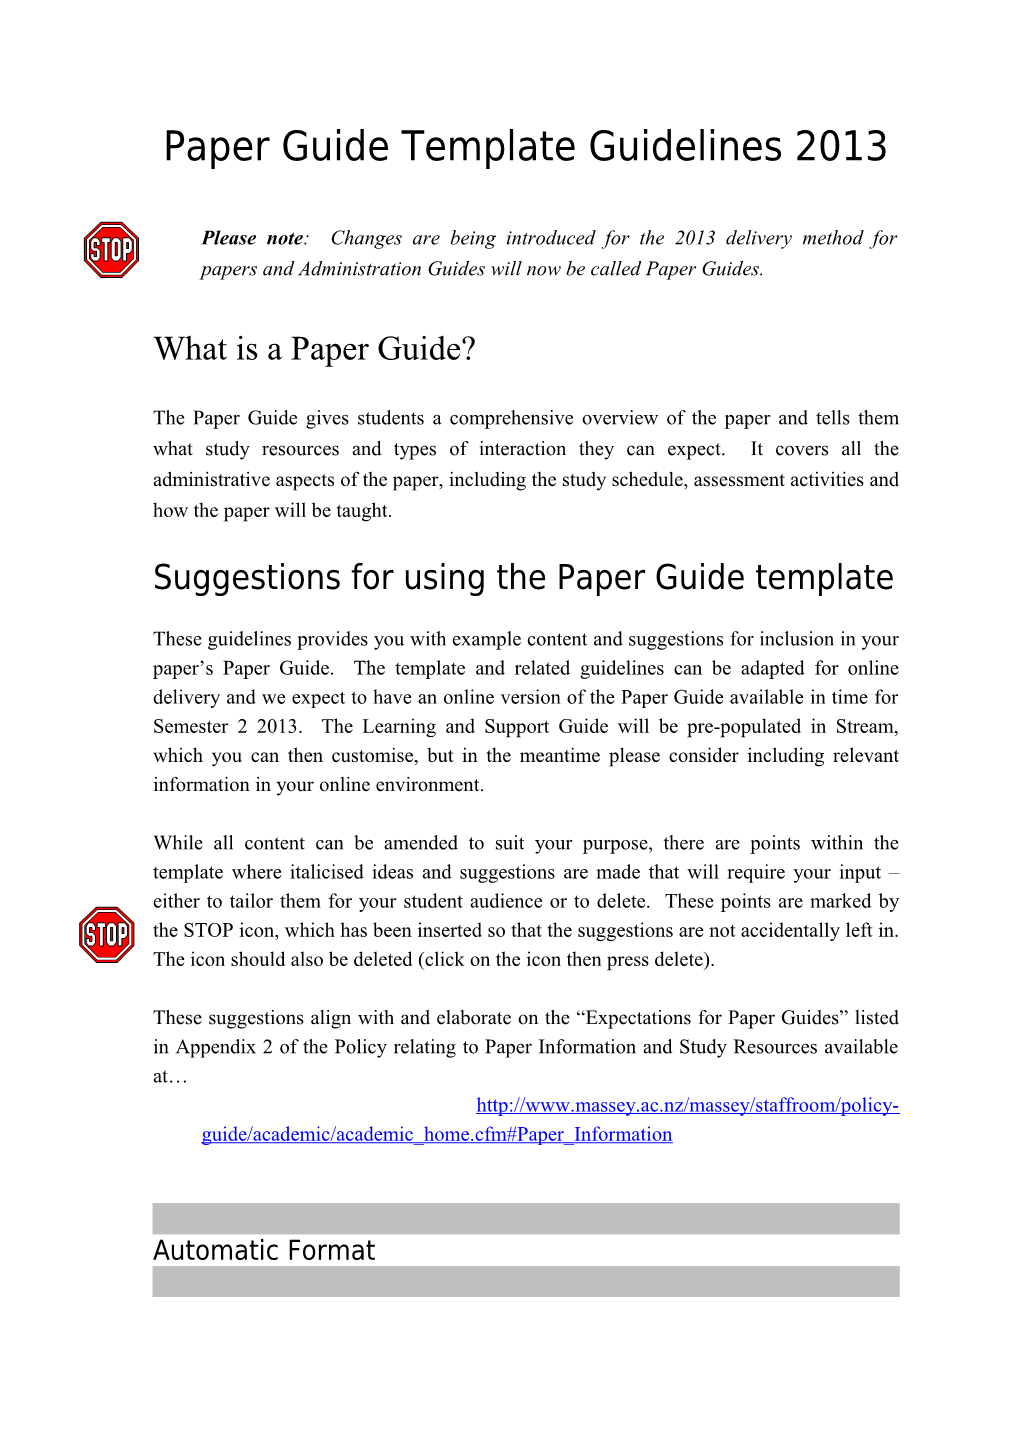 Paper Guide Template Guidelines 2013